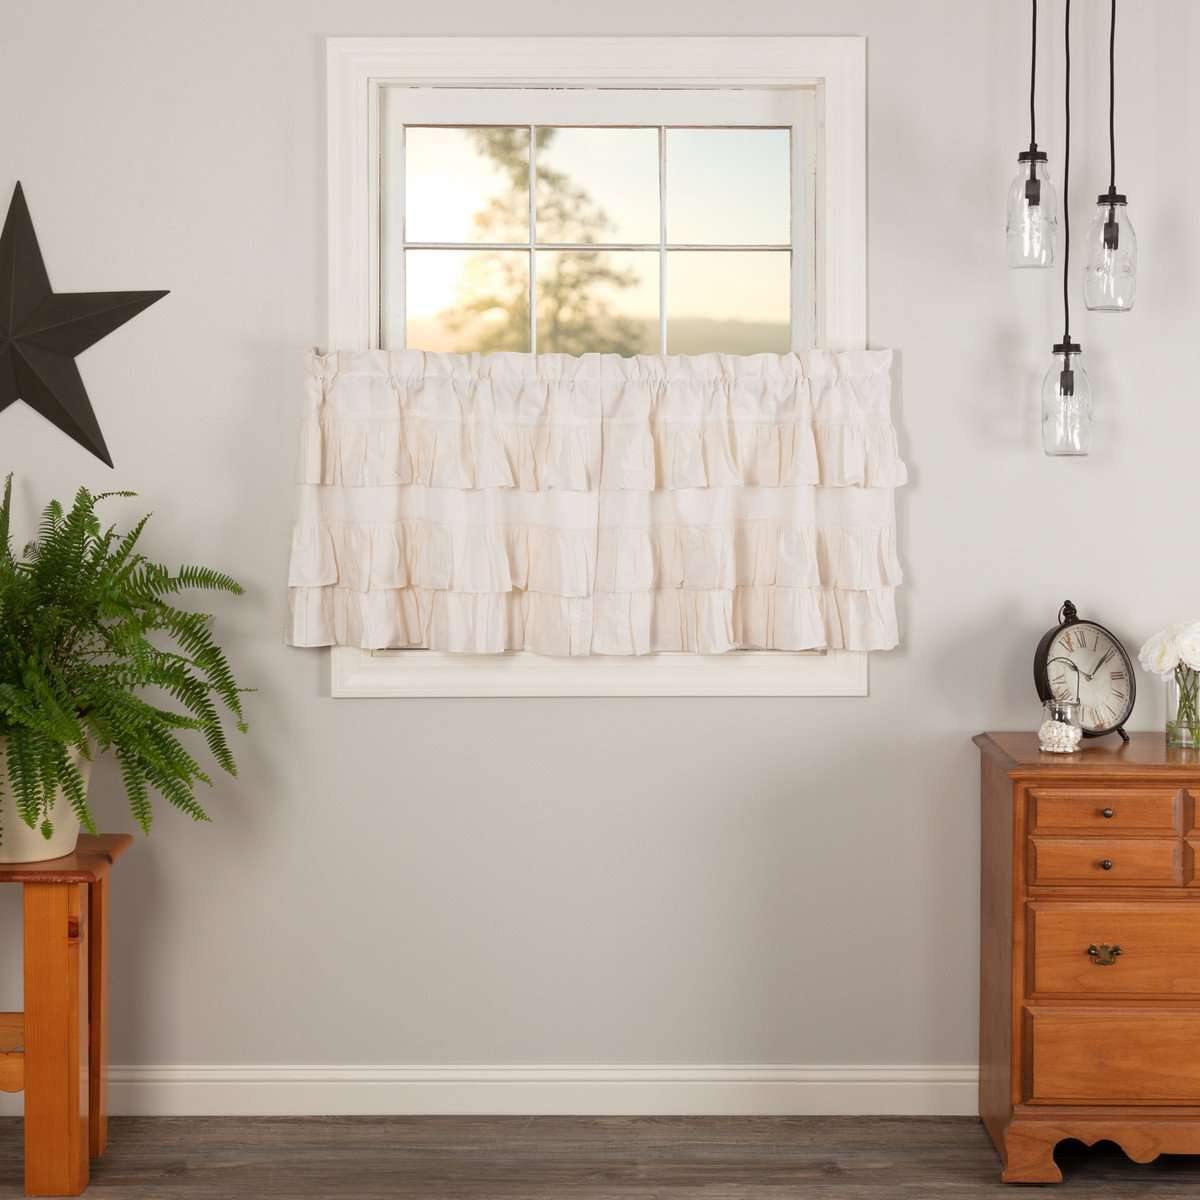 Simple Life Flax Antique White Ruffled Tier Curtain Set of 2 L24xW36 VHC Brands - The Fox Decor